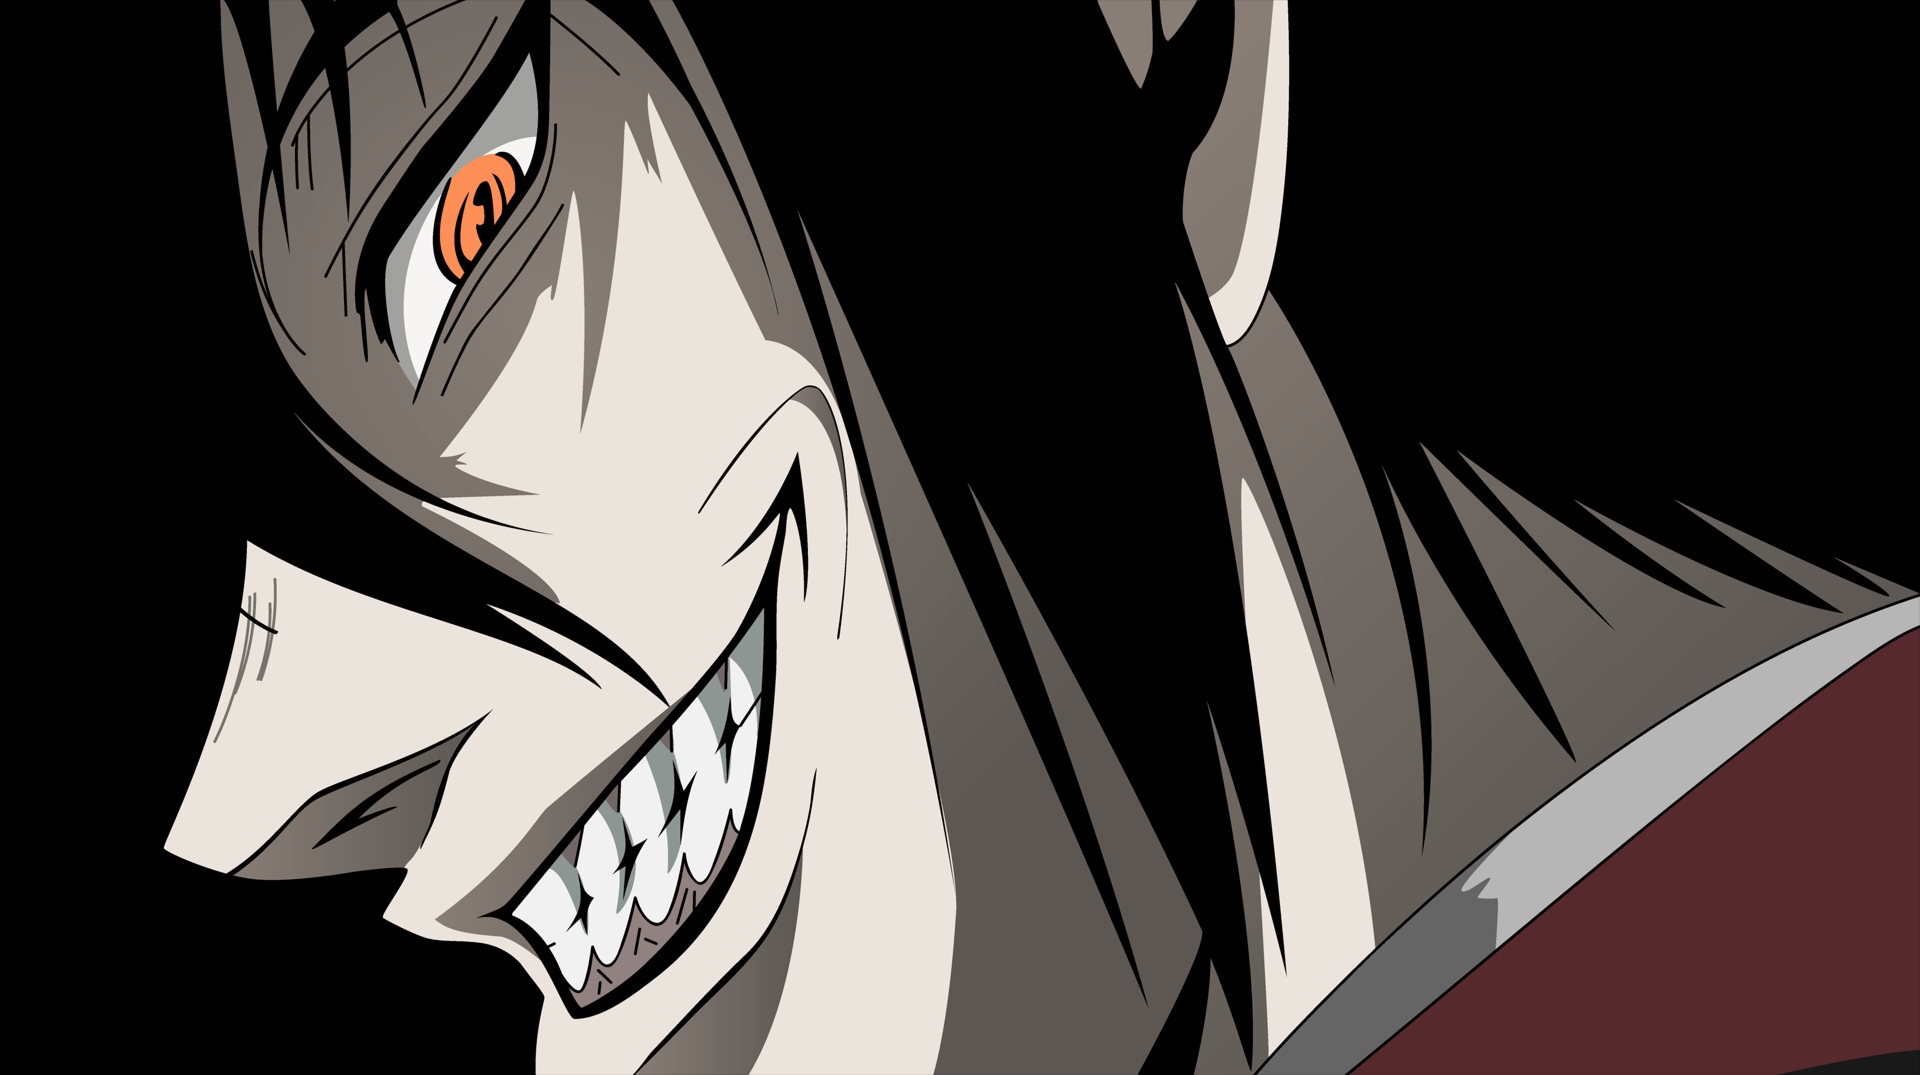 Hellsing anime wallpaper with a menacing grin.